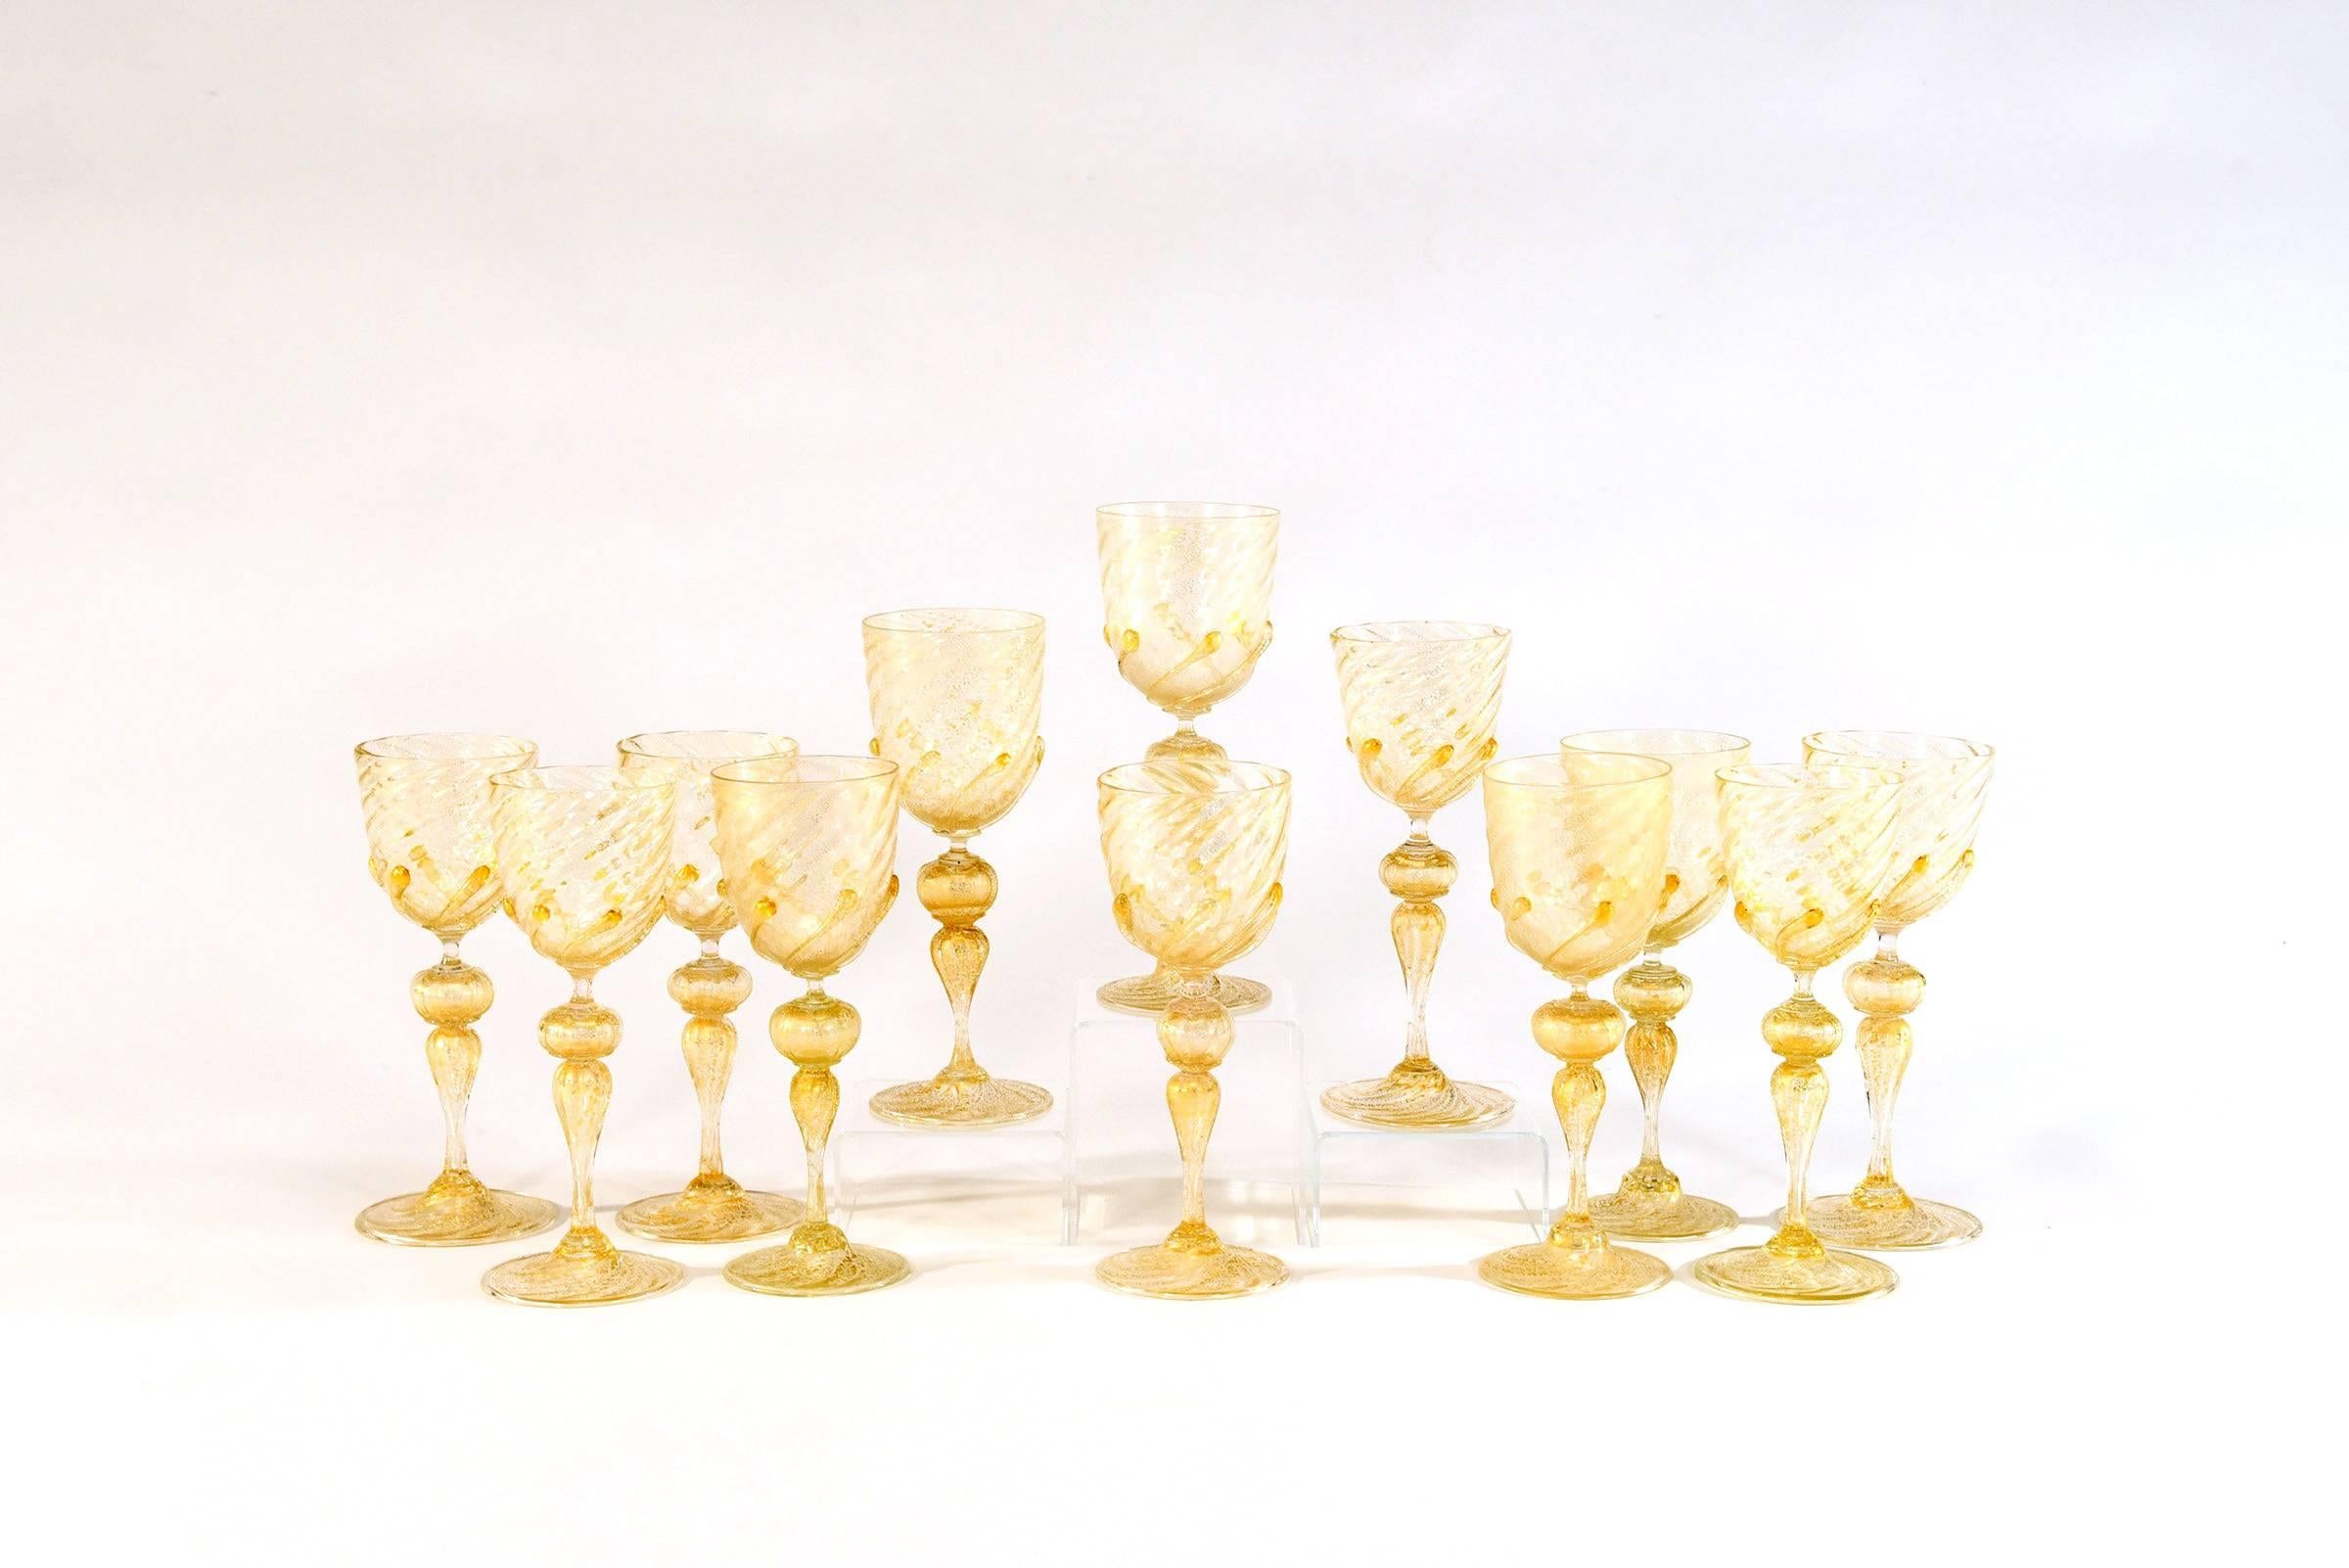 Offering an amazing set of 12 wine goblets that will be the talking point of your dinner conversation. These hand blown goblets scream gold! Clear glass filled with gold leaf and standing 9